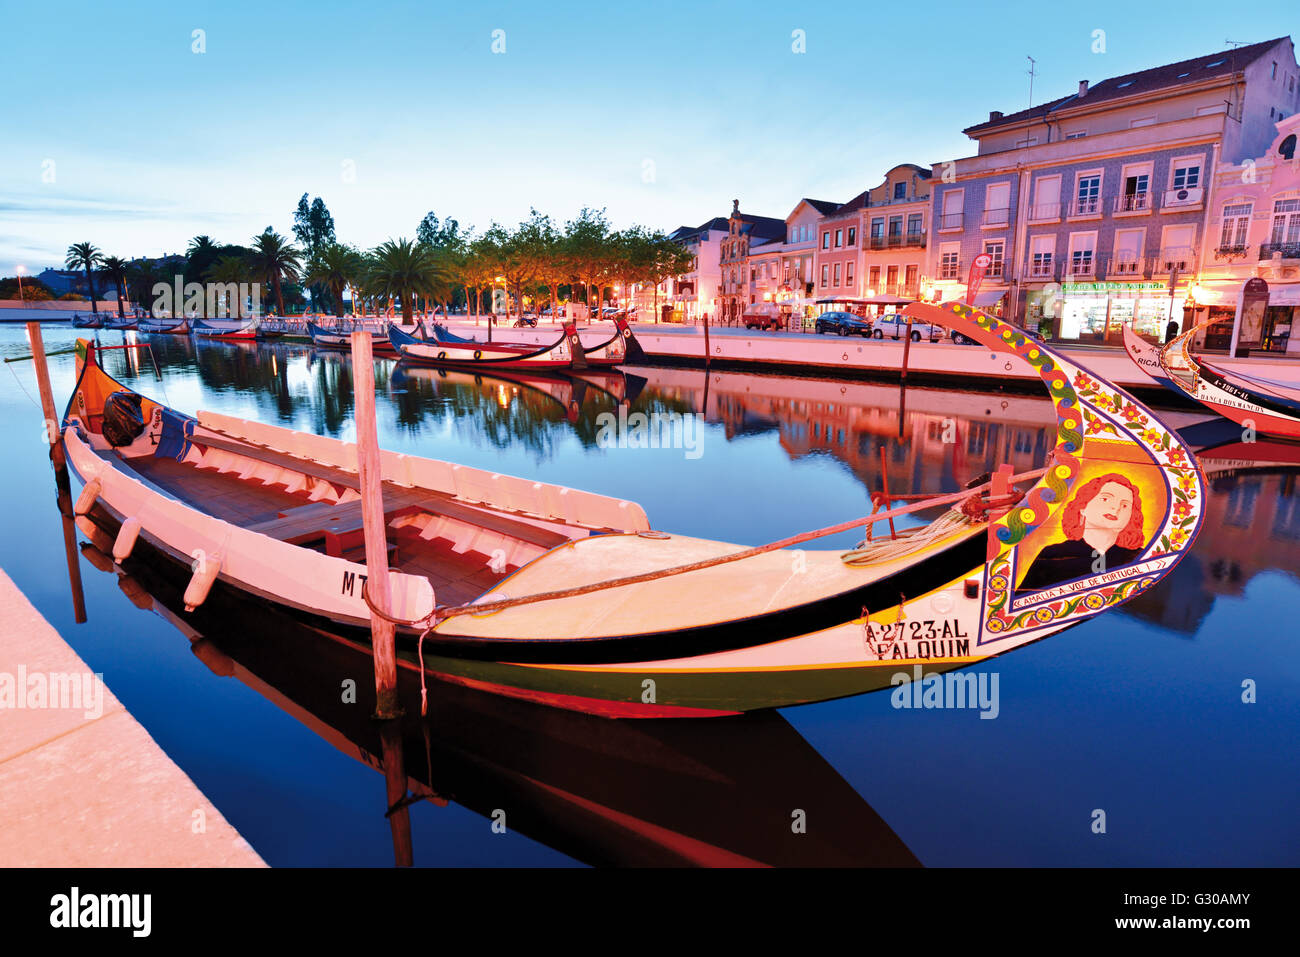 Portugal: Nocturnal view of a traditional Moliceiro boat with painting of Fado singer Amalia in the Canal Central Stock Photo